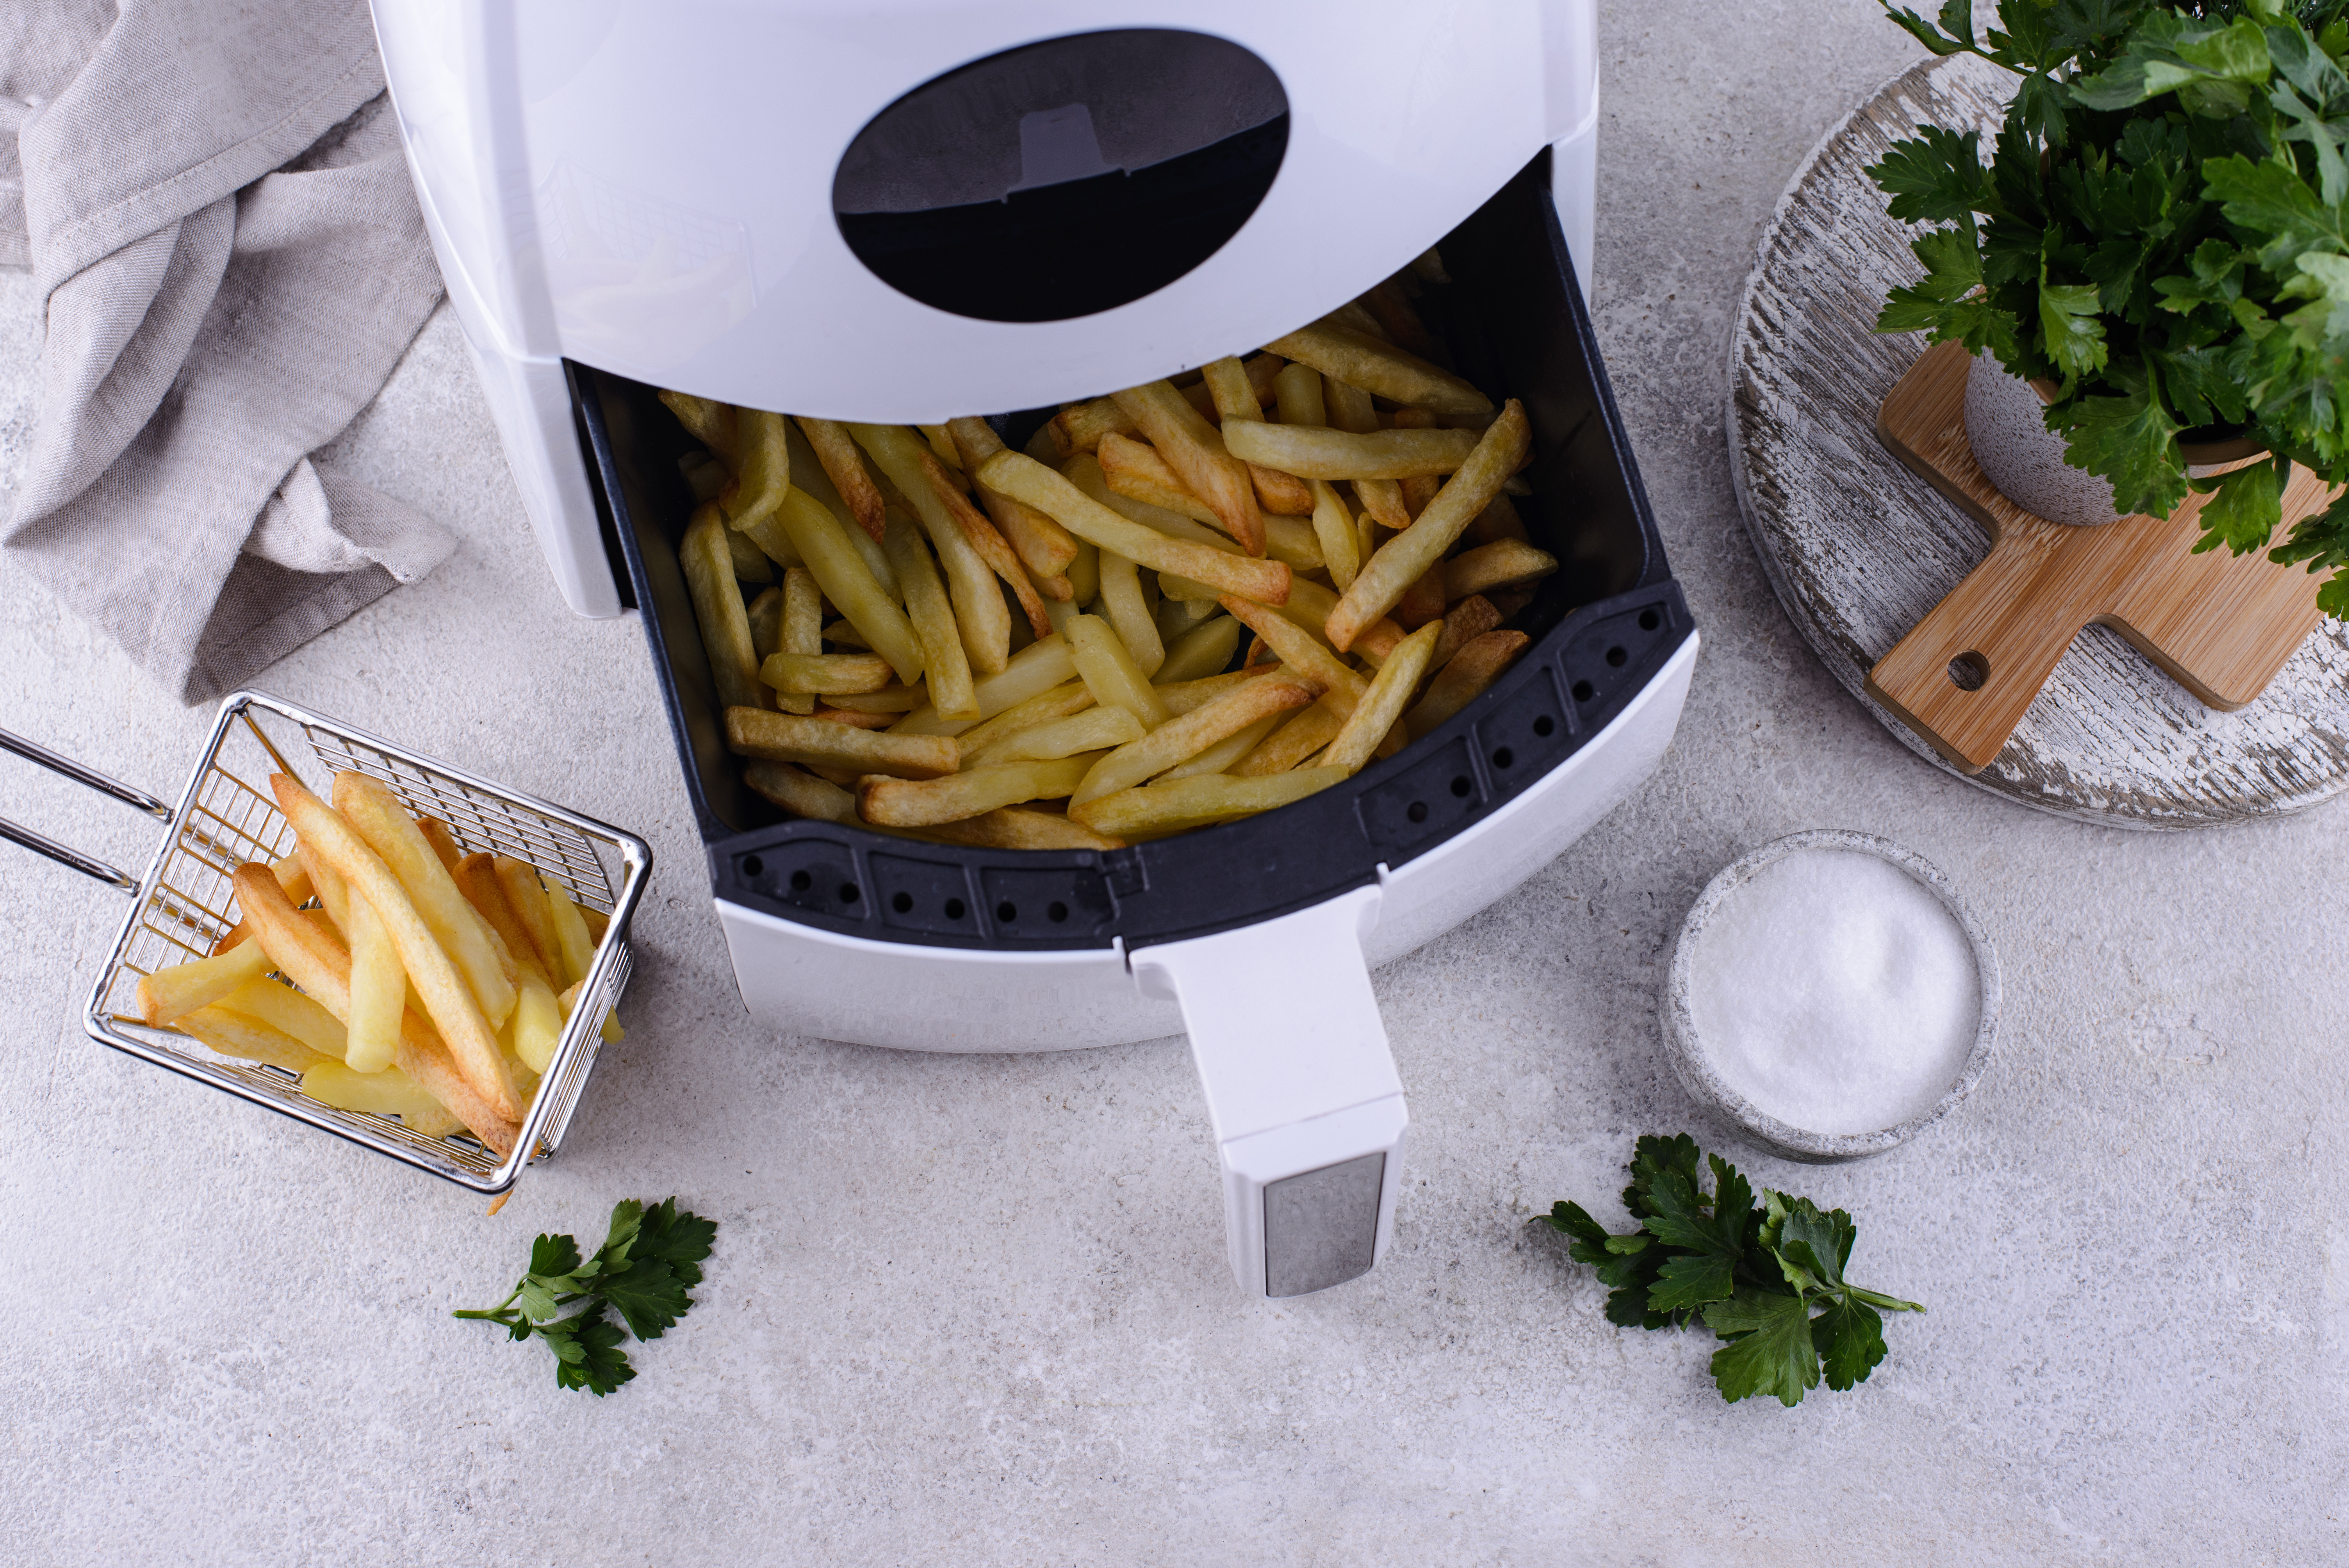 French fries cooked in air fryer. Healthy fat less food" data-uuid="91fb56b5-6091-3bd2-a55a-6694a5eeee08